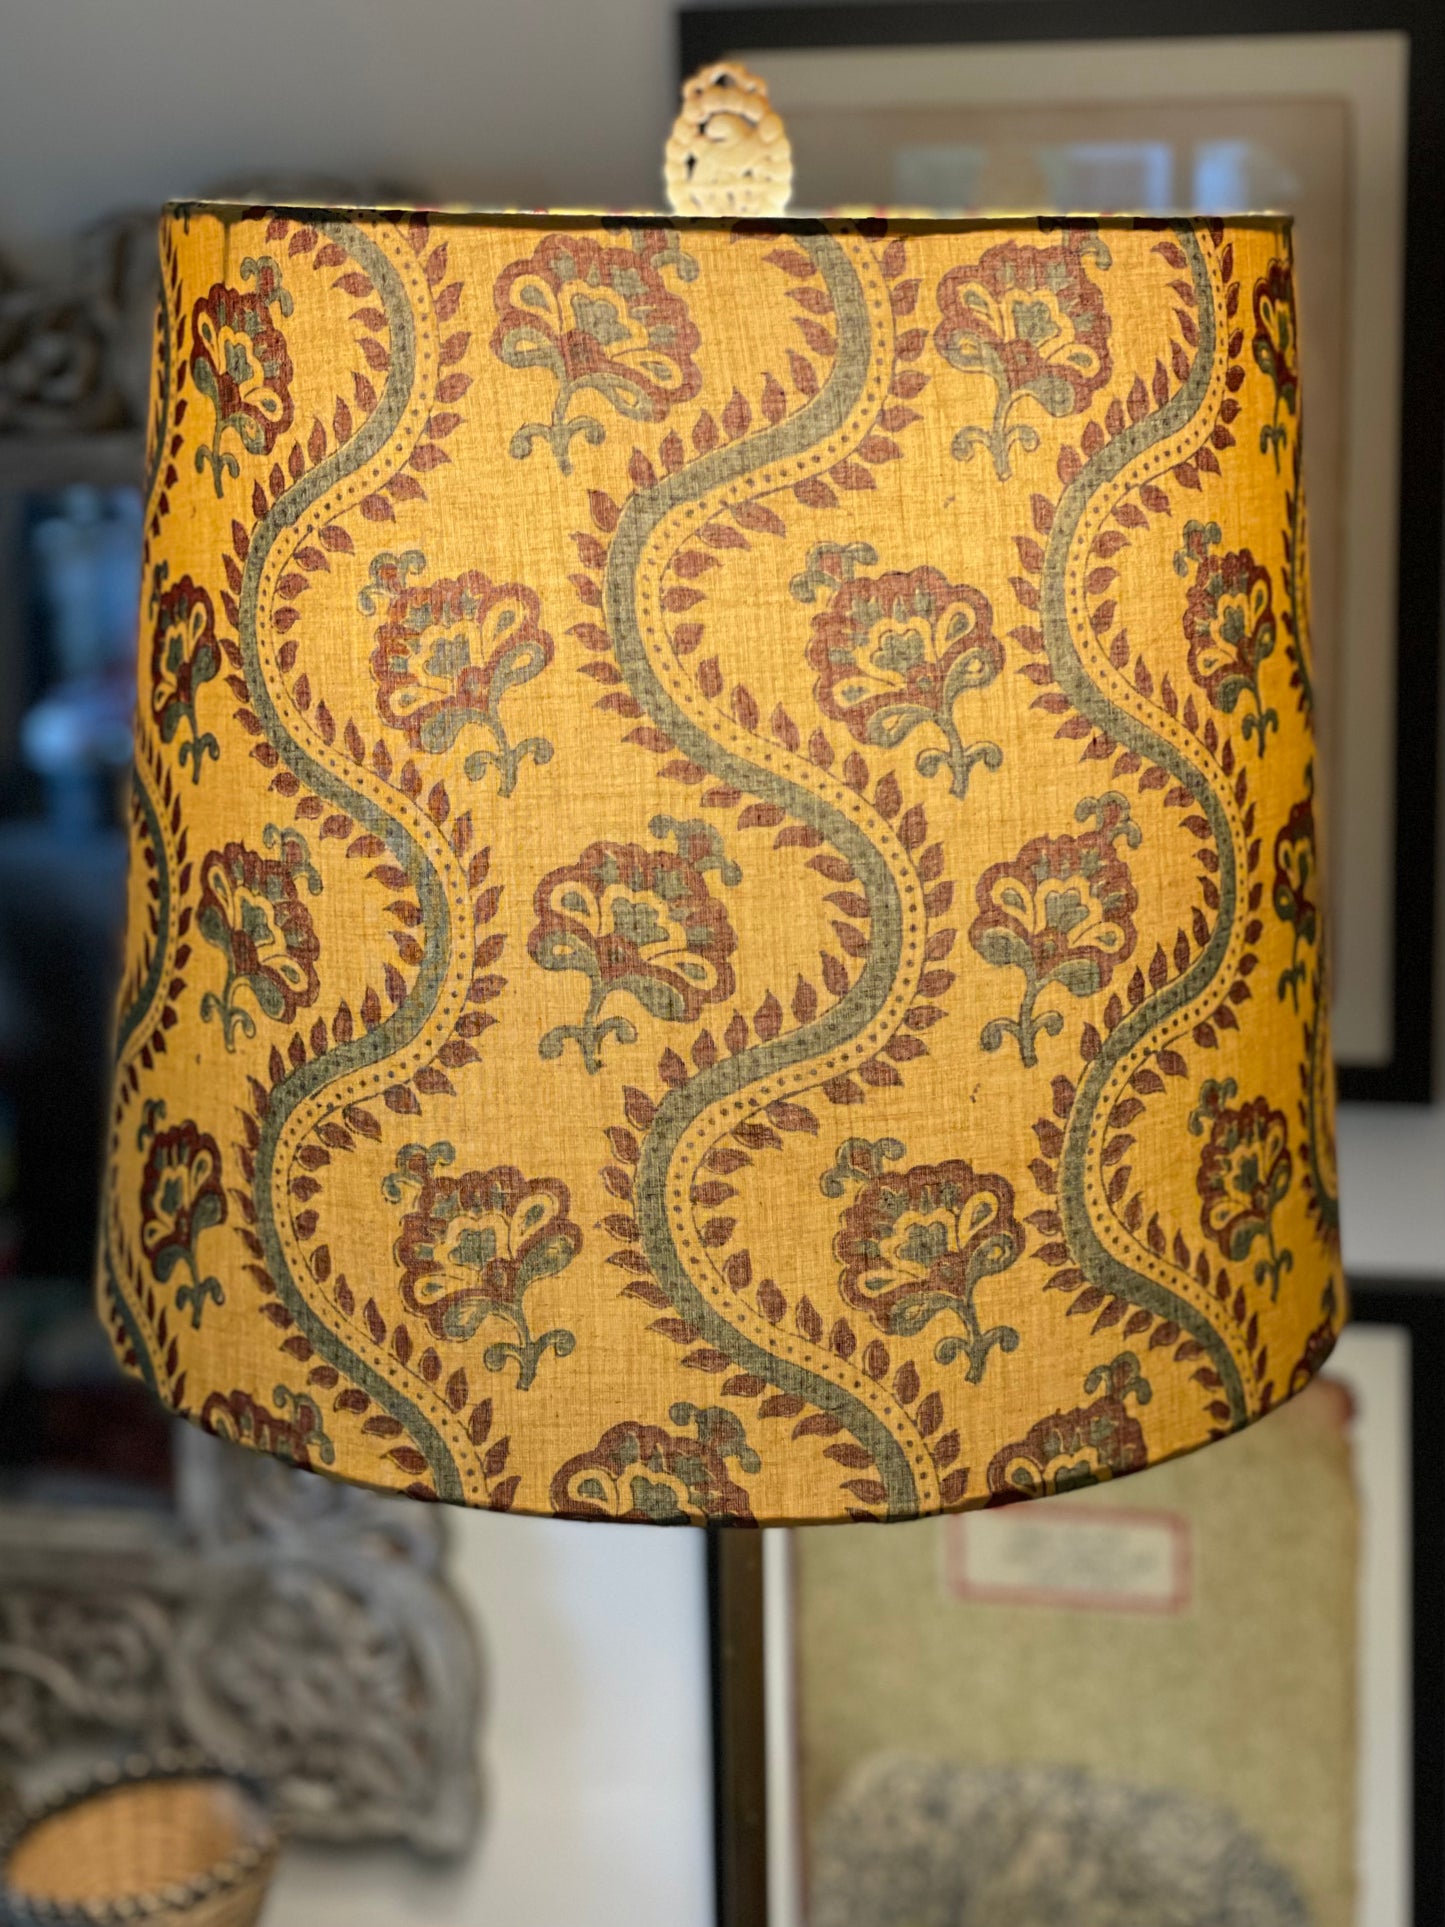 Large Empire Shade. 11.75 x 13.75 x 11.75. Ajrakh Mul Cotton Block Print. Mustard Yellow with Maroon and Cadet Blue Details.